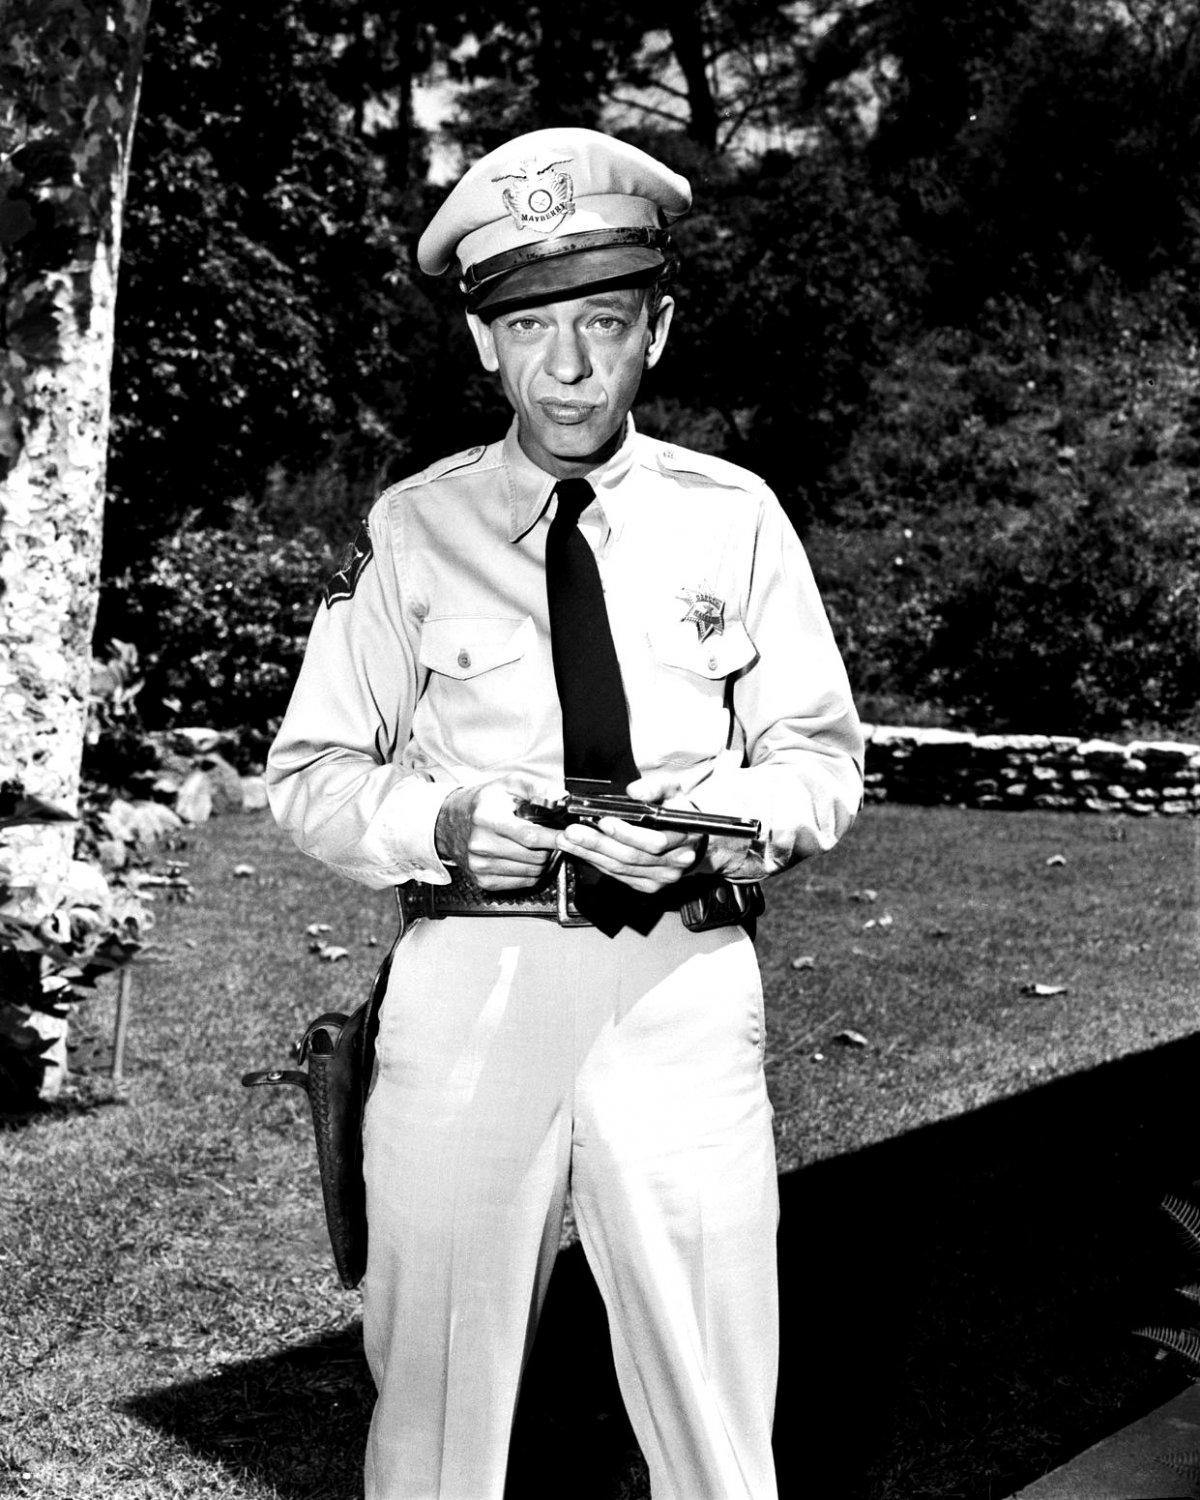 Don Knotts As Barney Fife In The Andy Griffith Show 8x10 Photo Zz 644